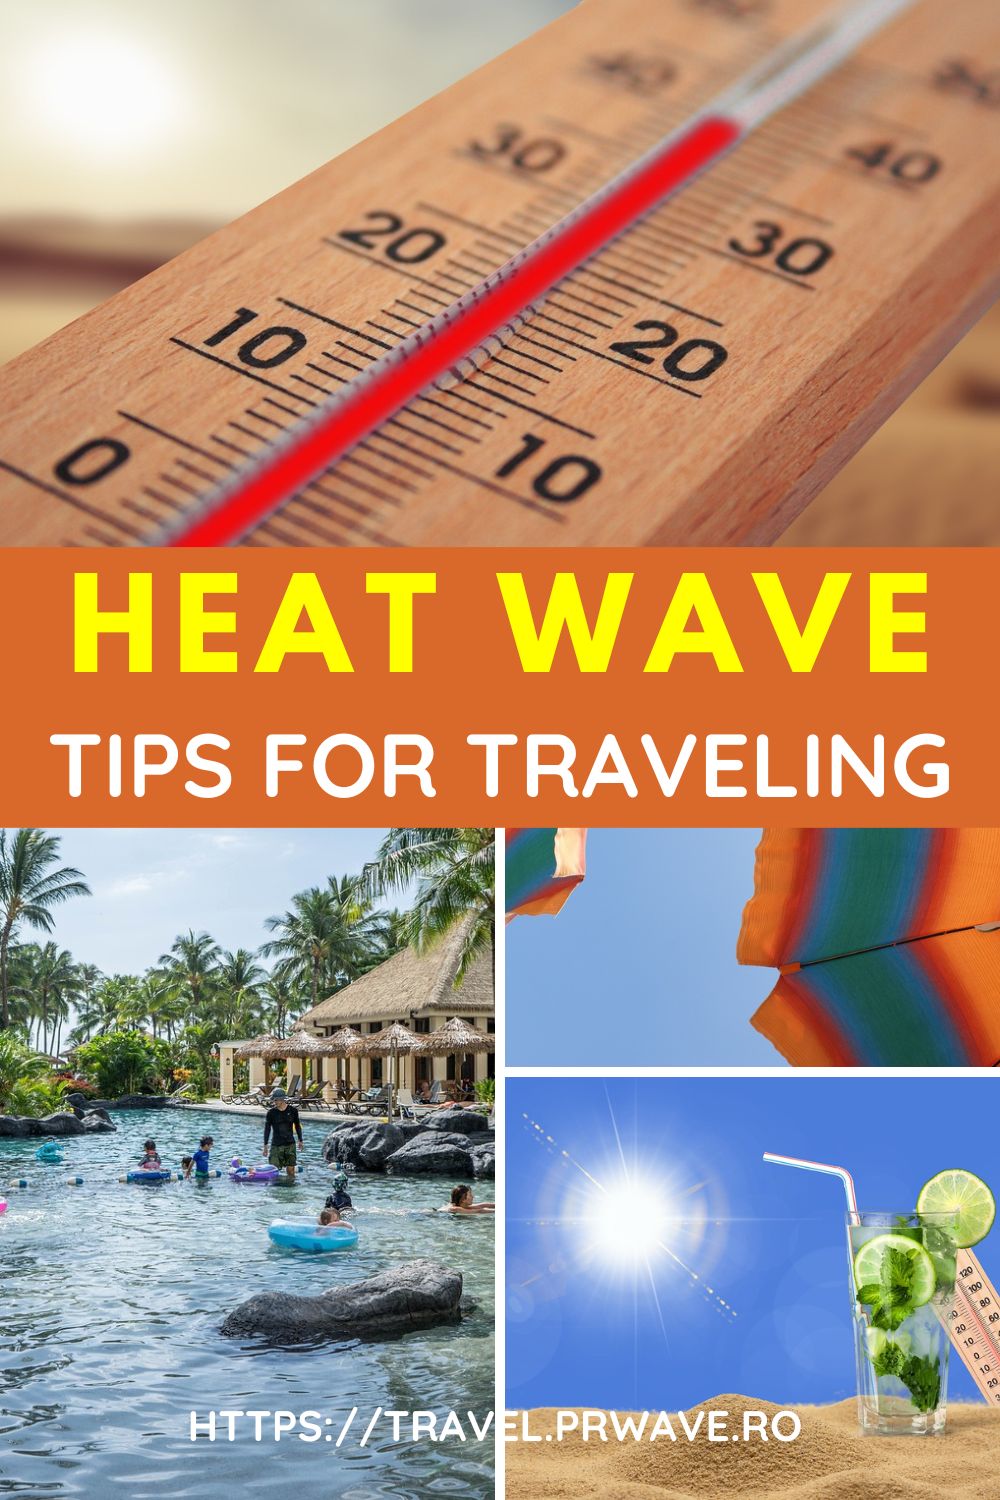 Heat Wave: Tips for Traveling in Hot Weather. Discover how to travel during a heatwave. Useful tips from a seasoned traveler #heatwave #summer #hotweather #heatwavetips #heatwavehealth #health #travel #traveltips